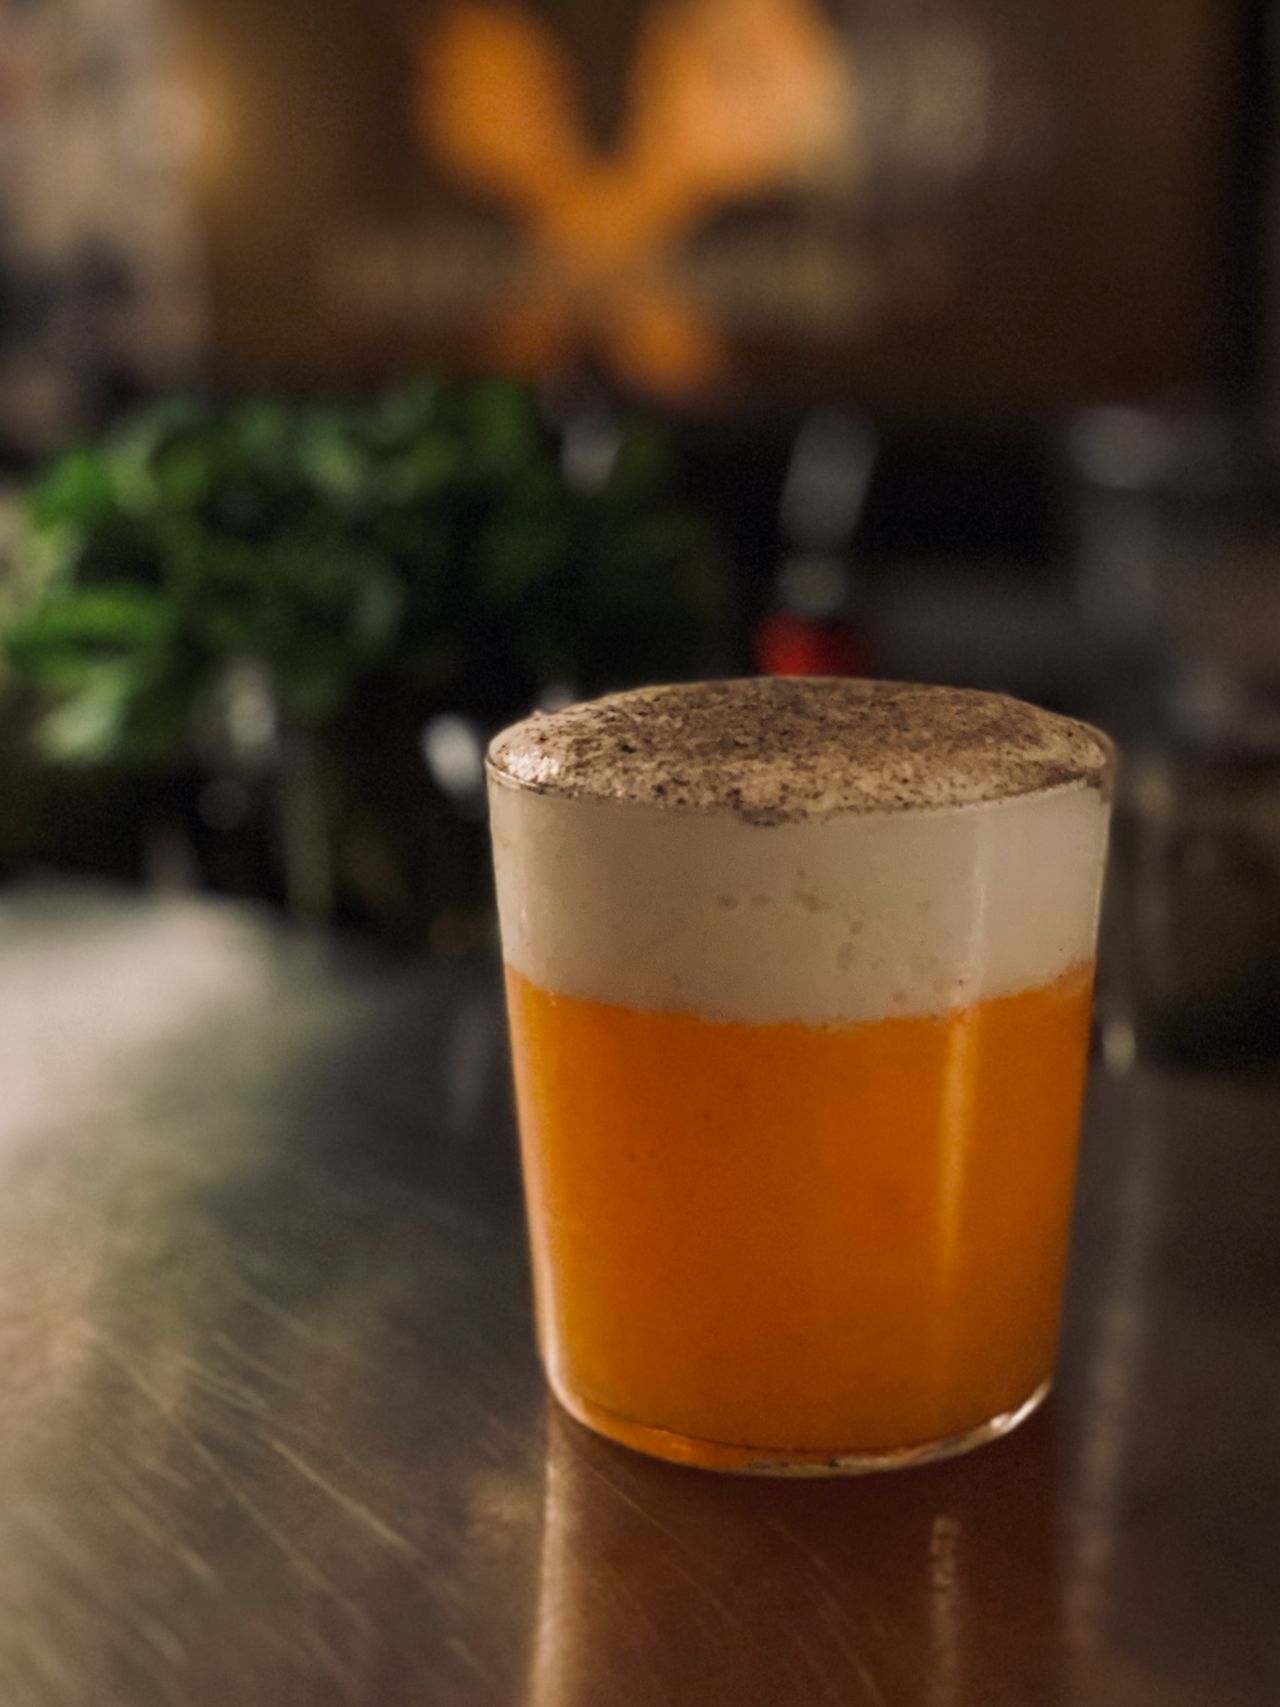 A portrait photo of a light orange colored cocktail with foam head.